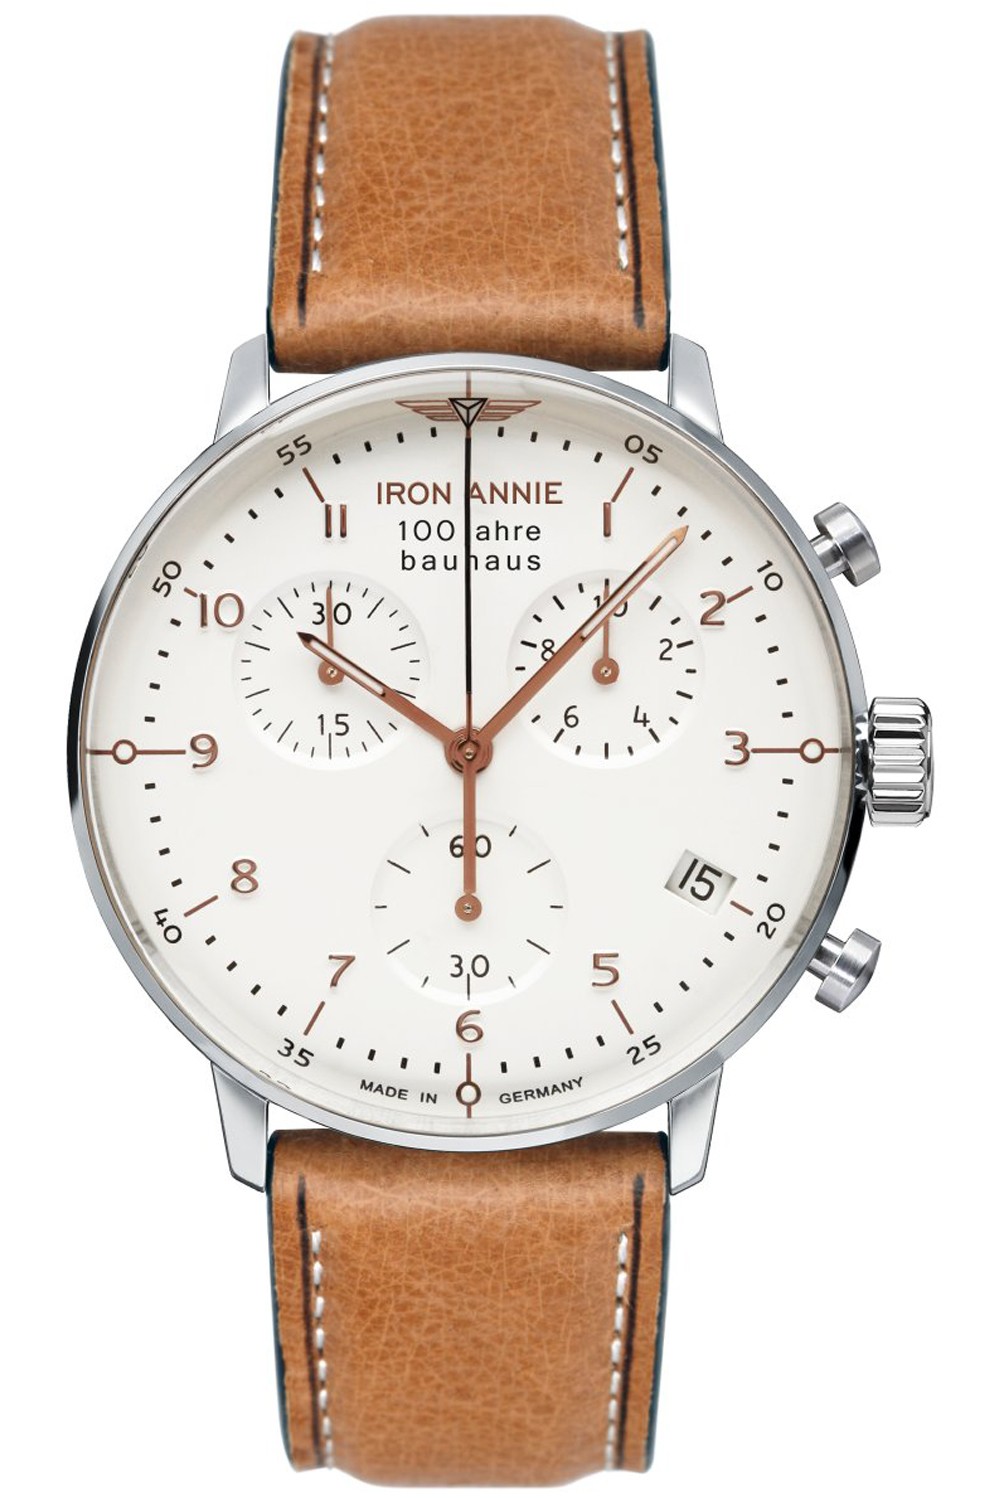 Iron Annie Men's Watch Iron Annie Stainless Steel Case Chronograph Men's  Watch with Light Brown Leather Strap and White Dial 136549 5096-4 | Comprar  Watch Iron Annie Stainless Steel Case Chronograph Men's